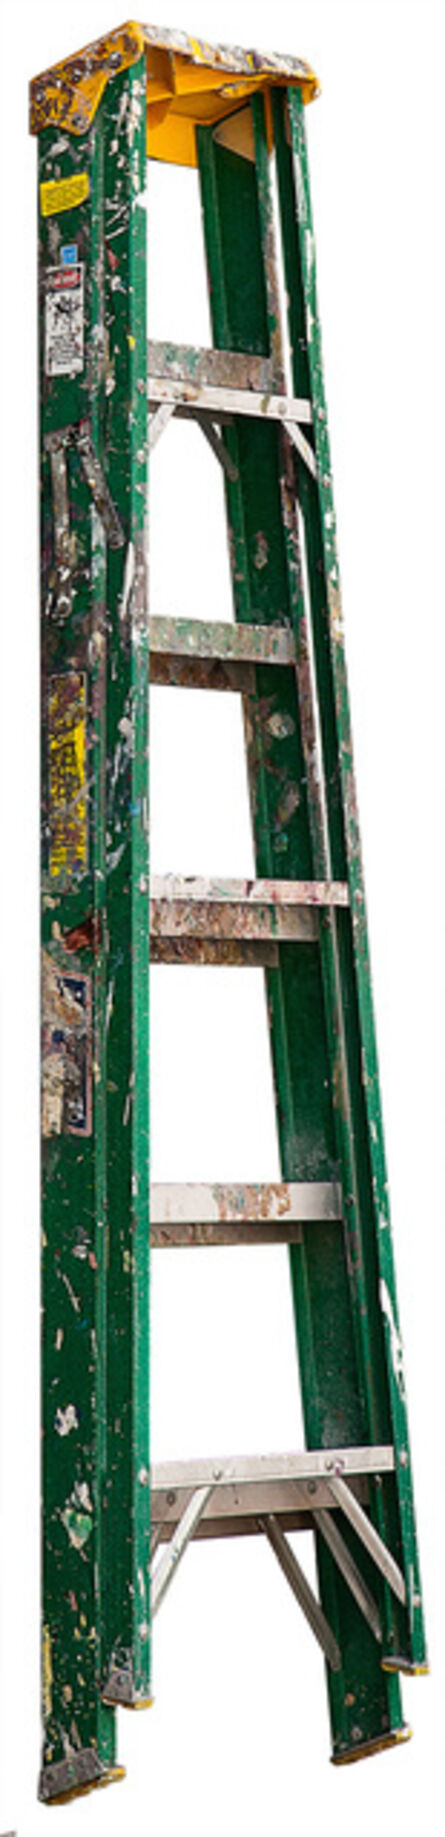 Jennifer Williams, ‘Medium Folding Ladder: Green with Yellow Top and Paint’, 2013